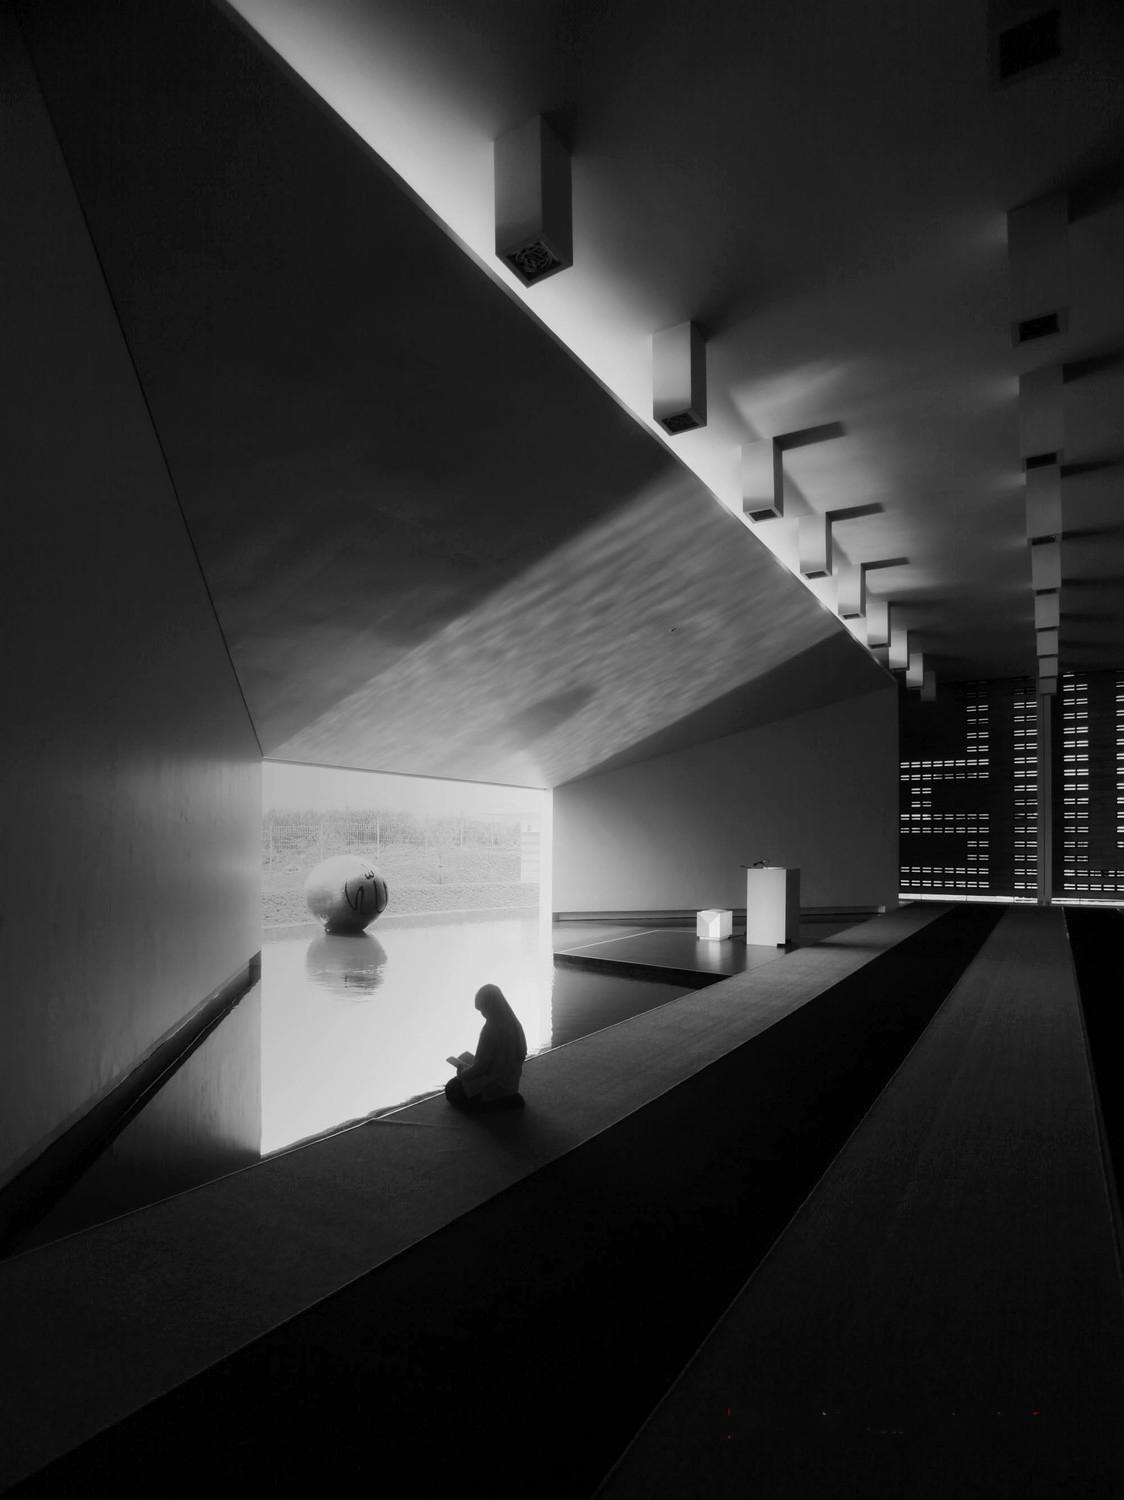 Black and white rendering of the prayer hall